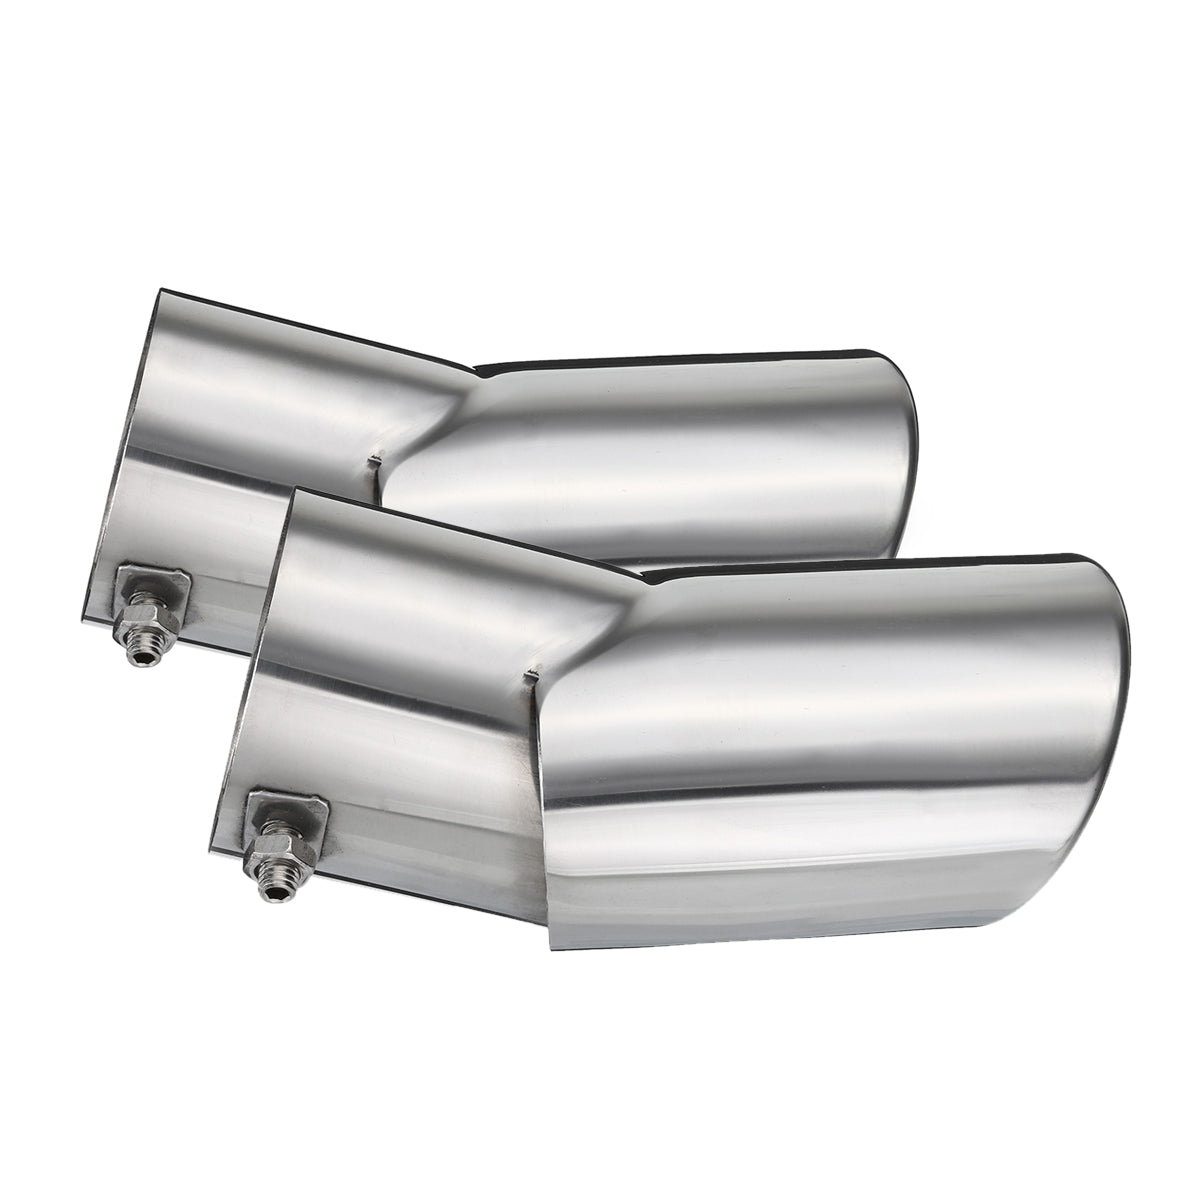 Pair Stainless Steel Exhaust Muffler Tail Pipe For Land Rover Sport 2002-2010 - Auto GoShop